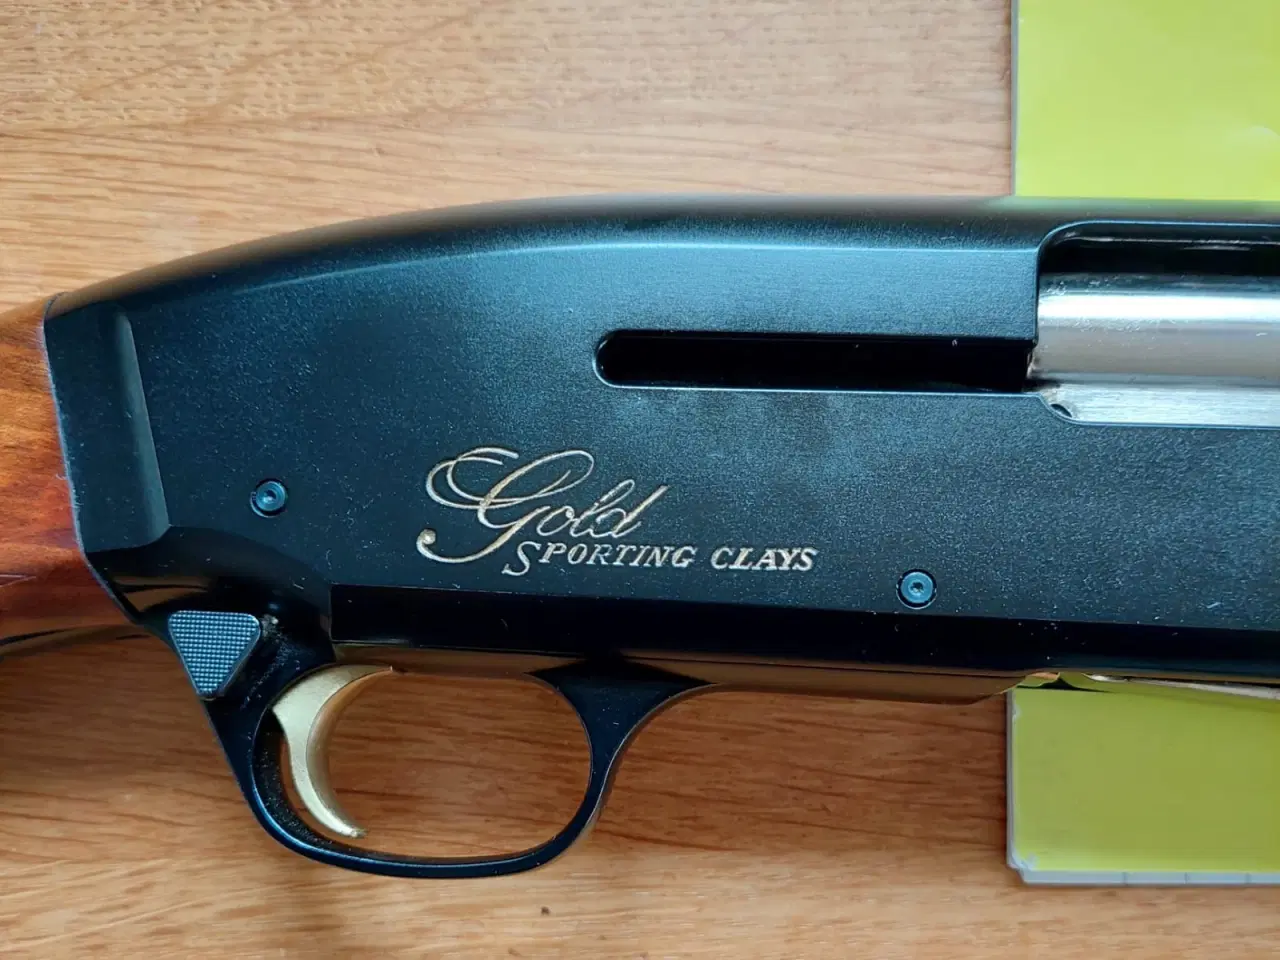 Billede 2 - Browning Sporting Gold Clays - halvautomat